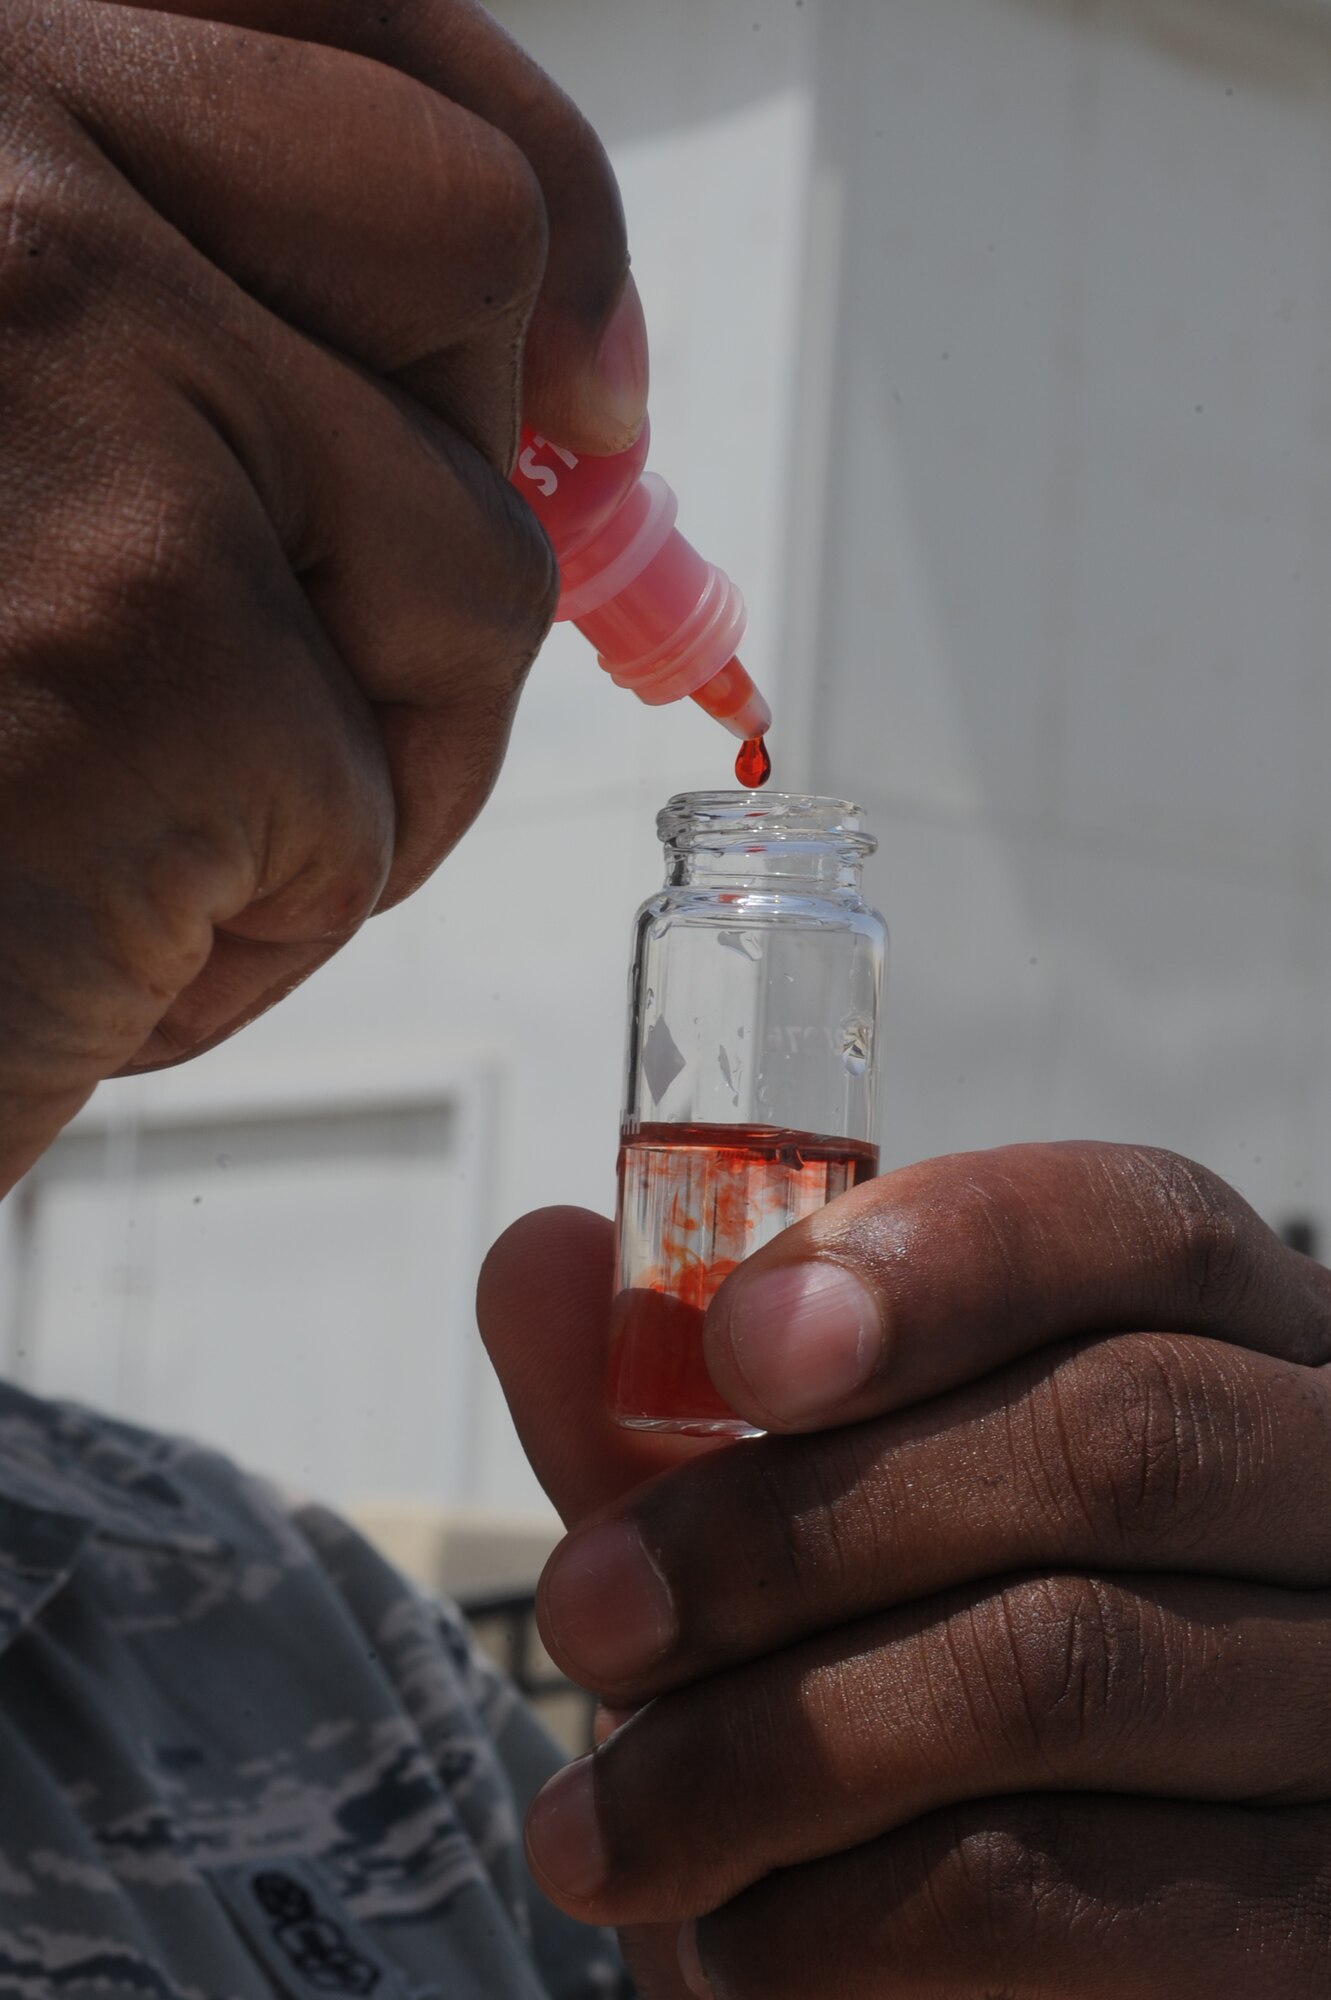 U.S. Air Force Master Sgt. Nathan Hanzy, 380th Expeditionary Medical Group NCO in charge of preventive medicine, checks the base pool for the proper amount of chlorine at an undisclosed location in Southwest Asia July 16, 2013. Hanzy inspects 20 different facilities. Hanzy is native to Gray, La., and is deployed from Offutt Air Force Base, Neb. (U.S. Air Force photo by Staff Sgt. Joshua J. Garcia)